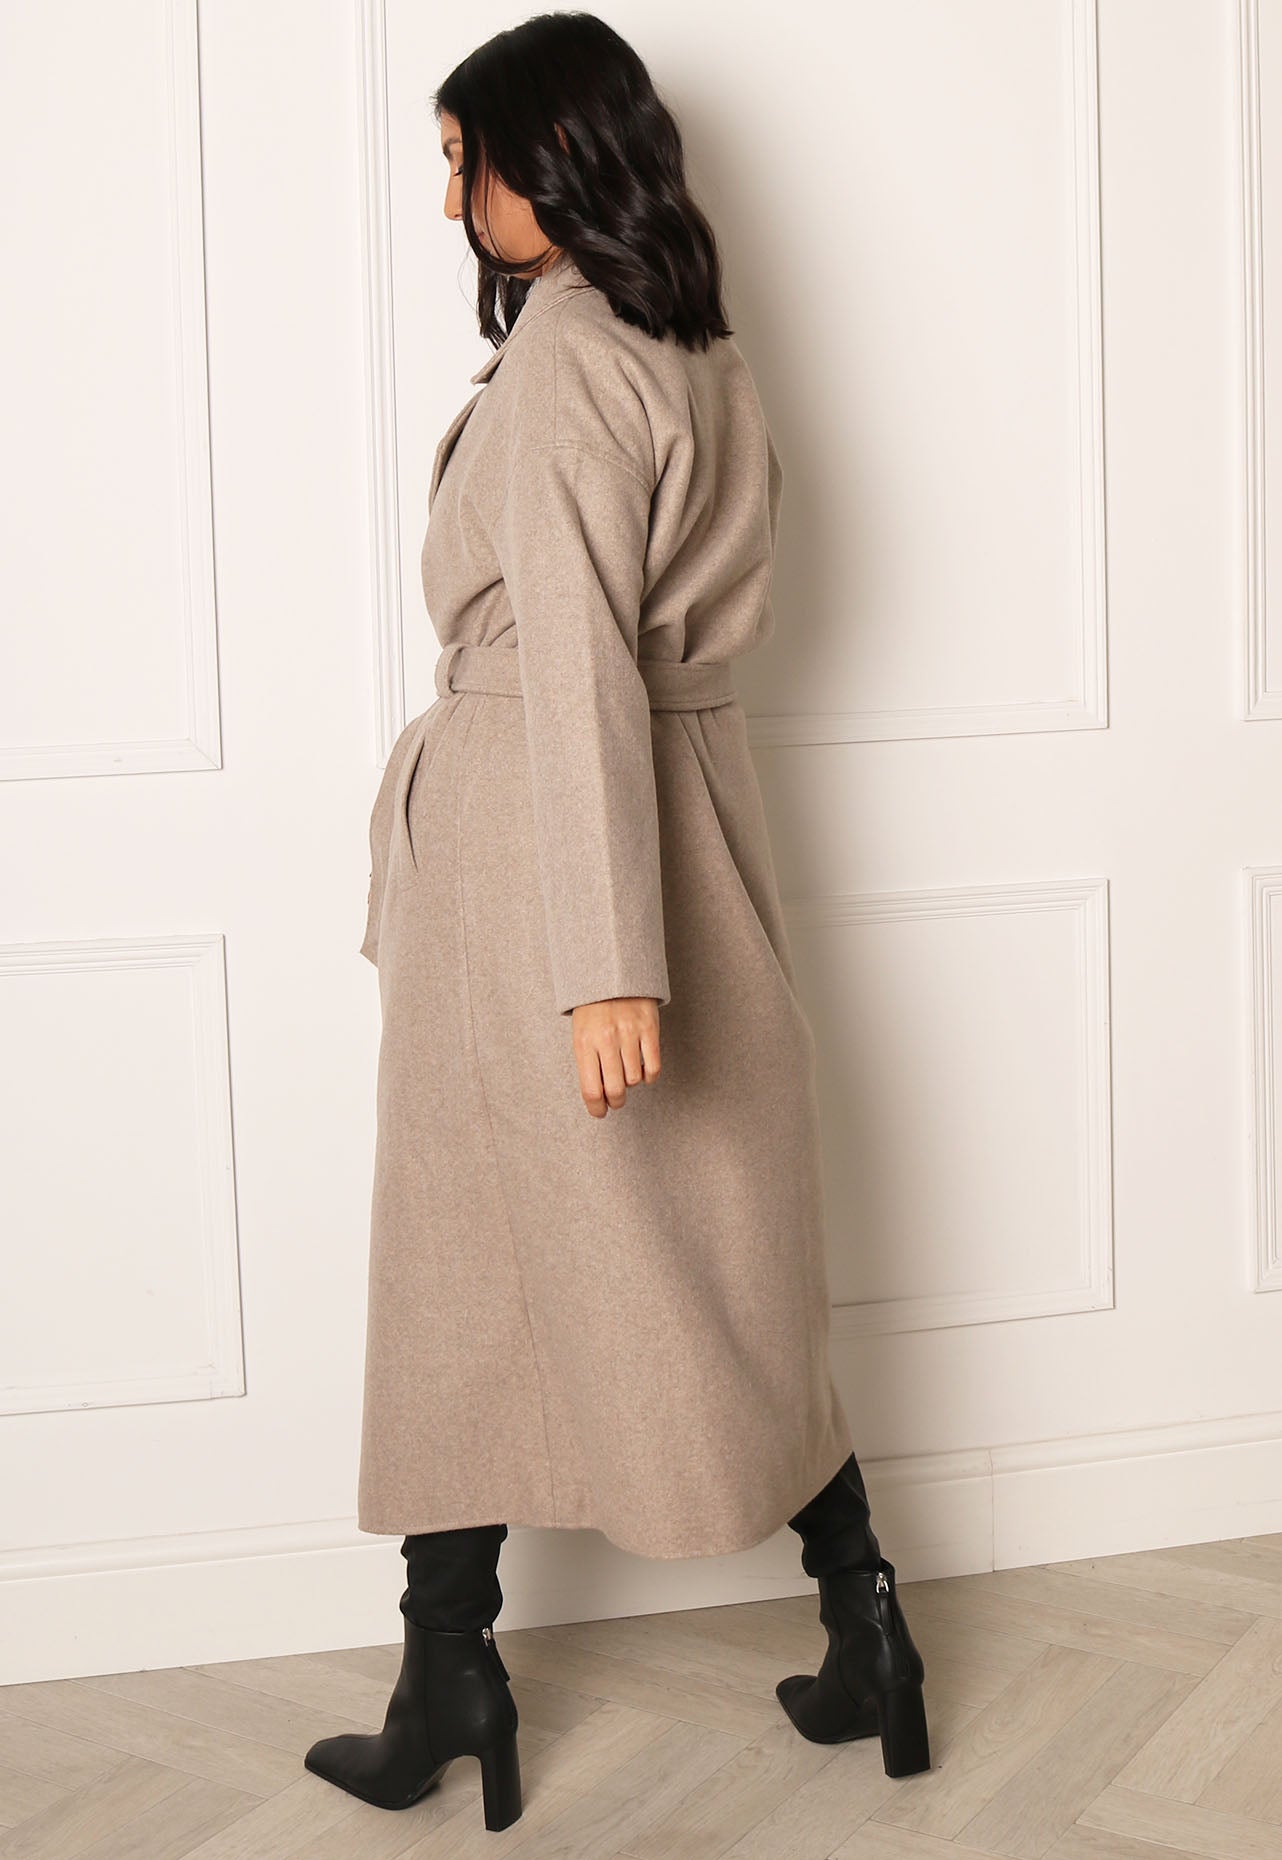 
                  
                    ONLY Ingrid Smart Double Breasted Longline Wool Trench Coat with Belt in Beige - One Nation Clothing
                  
                